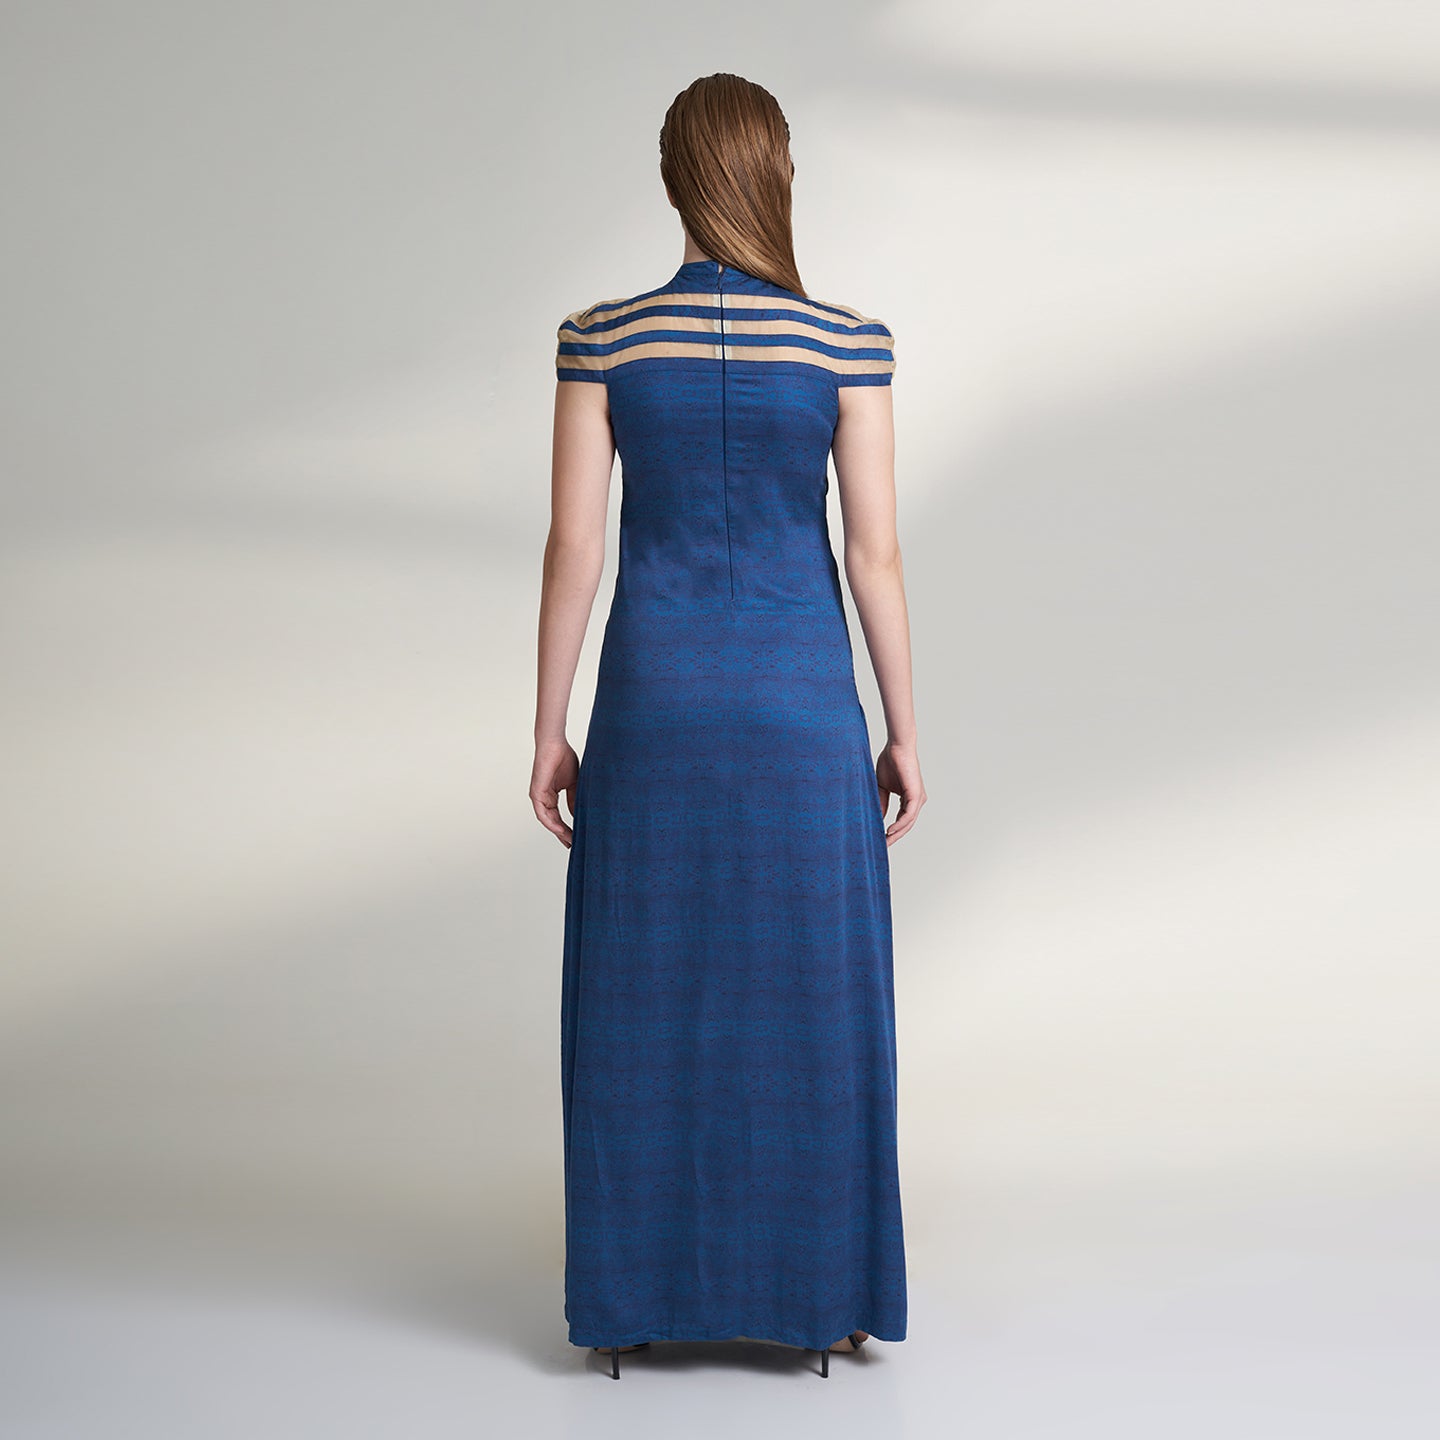 A printed blue long evening dress crafted in organic lotus silk and organza fabric accentuated with a thigh high slit and a short stripe cape attached to the dress.